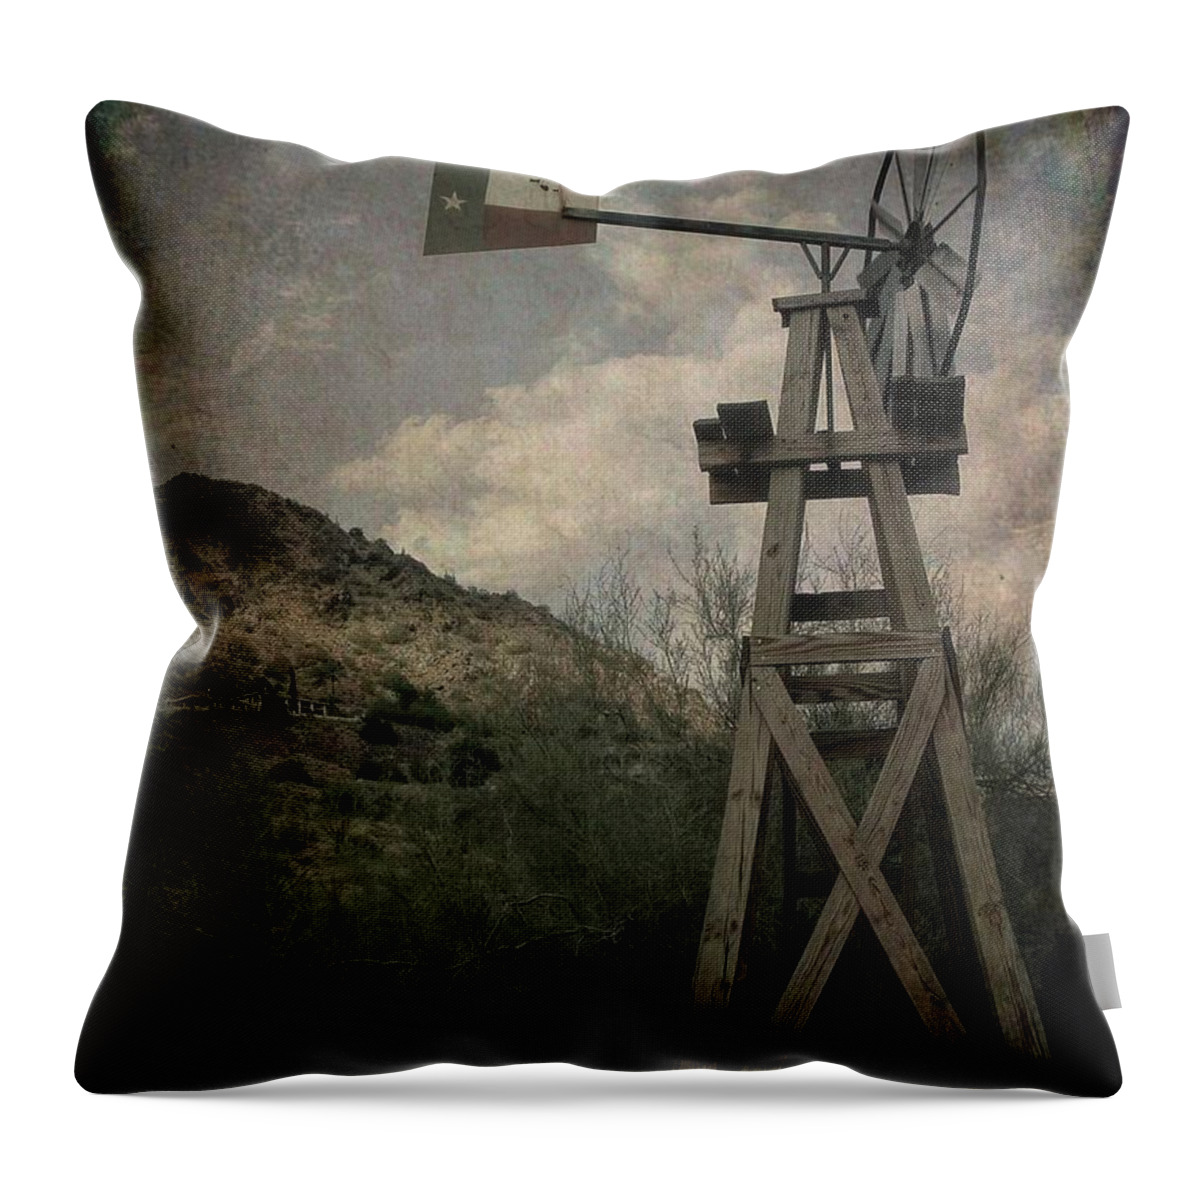 Antique Throw Pillow featuring the photograph Windmill by Darryl Brooks